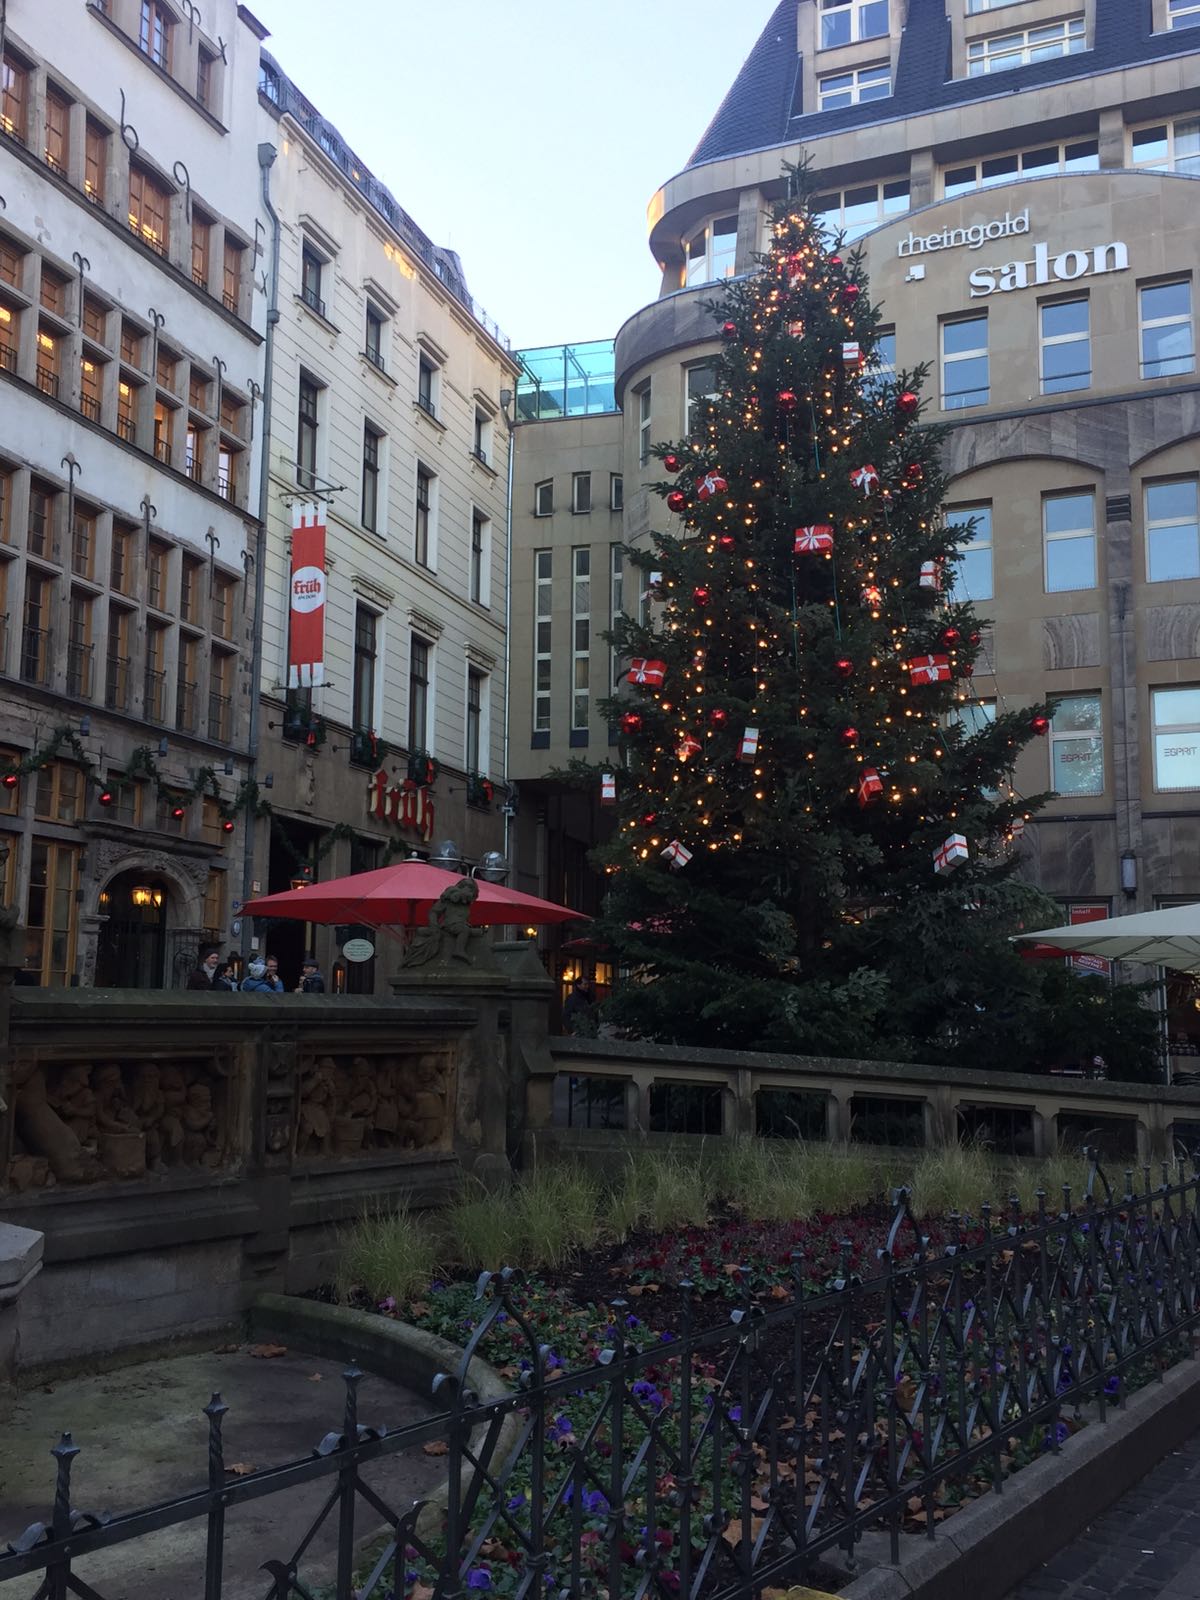 Koln Germany. Köln is the German word for Cologne. This city is a must see, especially during Christmas time...